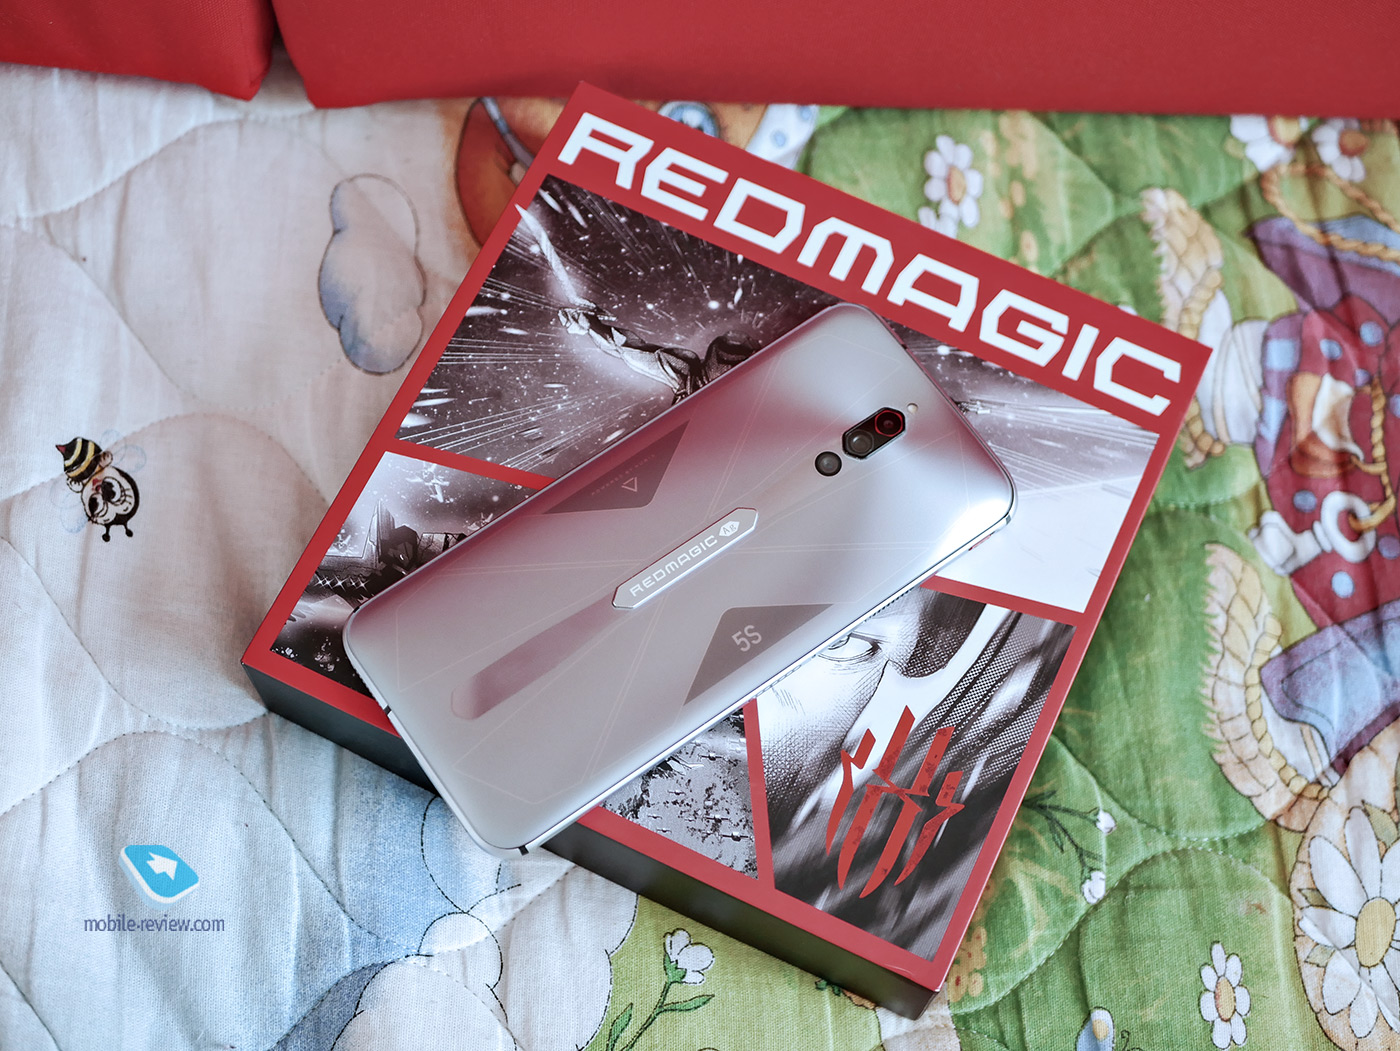 Review of the gaming smartphone RedMagic 5S from ZTE - you definitely won't lose!